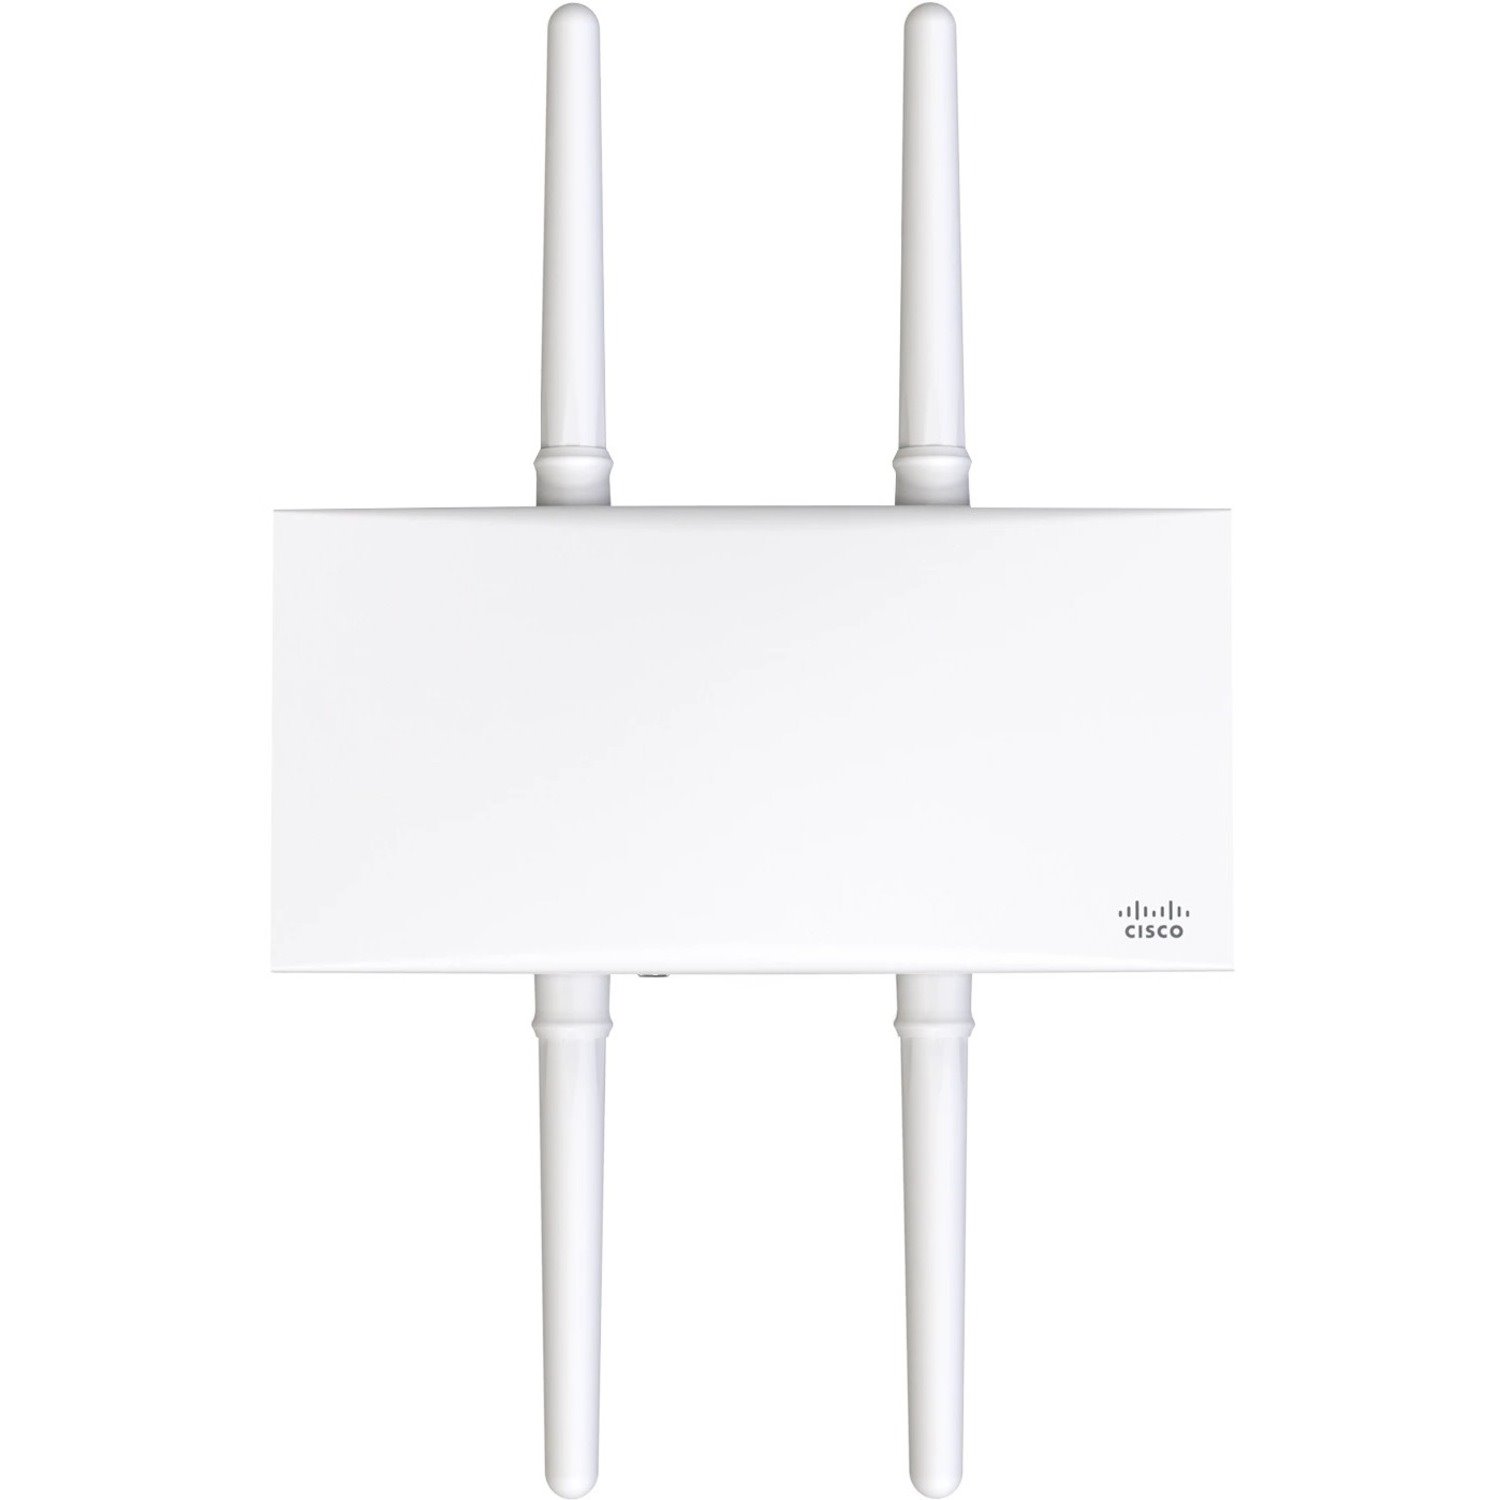 Meraki MR76 Dual Band IEEE 802.11 a/b/g/n/ac/ax 1.70 Gbit/s Wireless Access Point - Outdoor